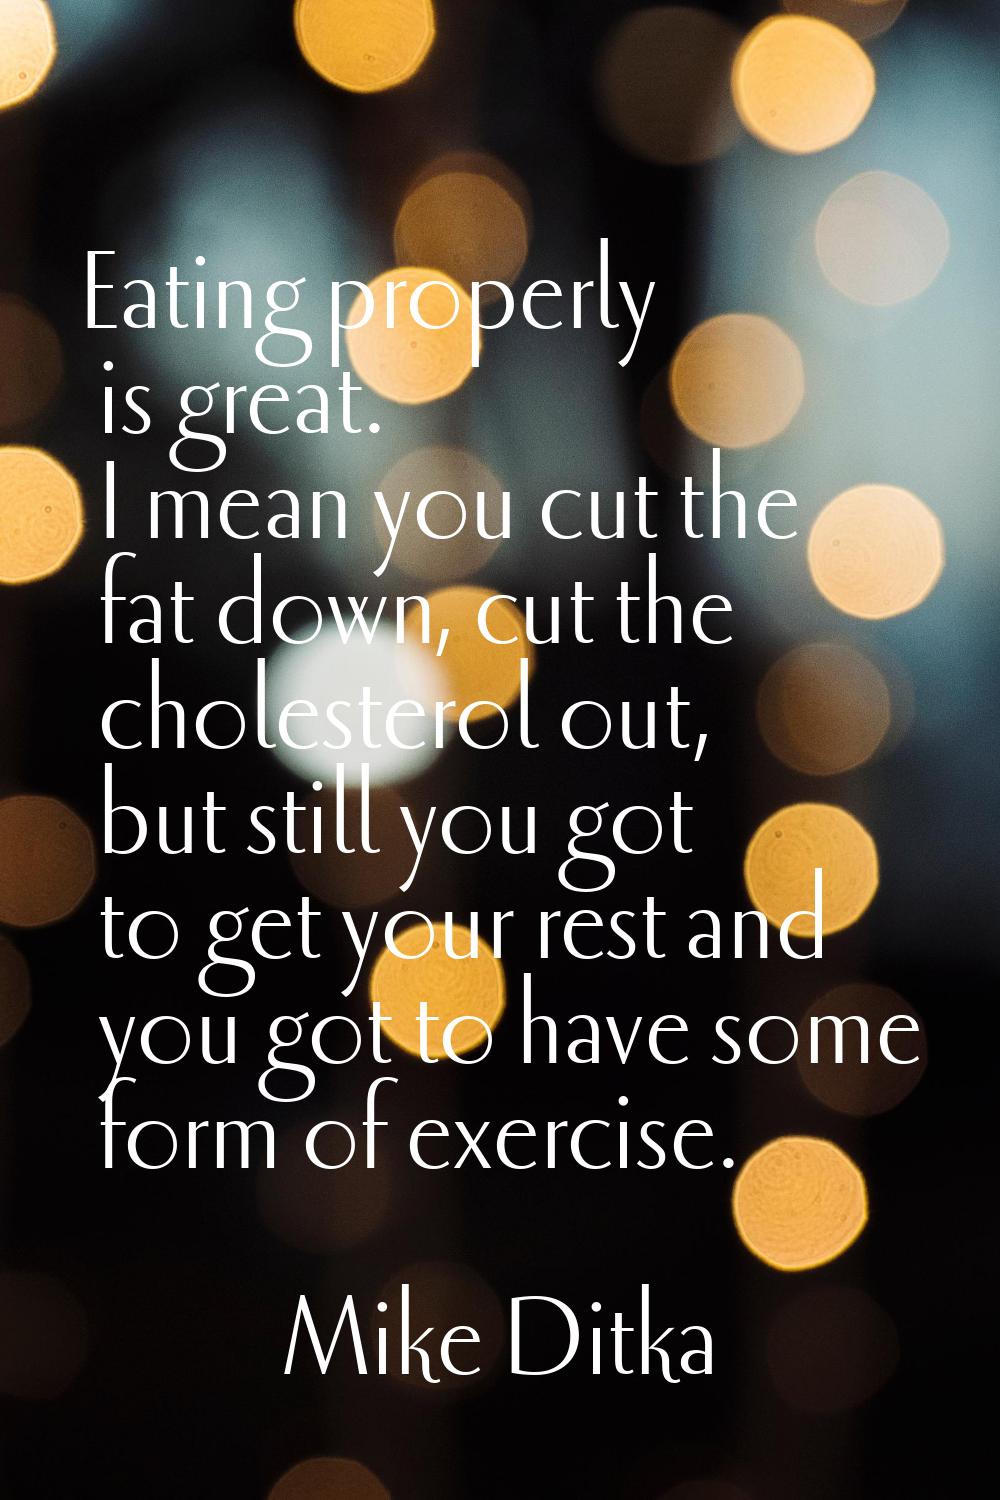 Eating properly is great. I mean you cut the fat down, cut the cholesterol out, but still you got t